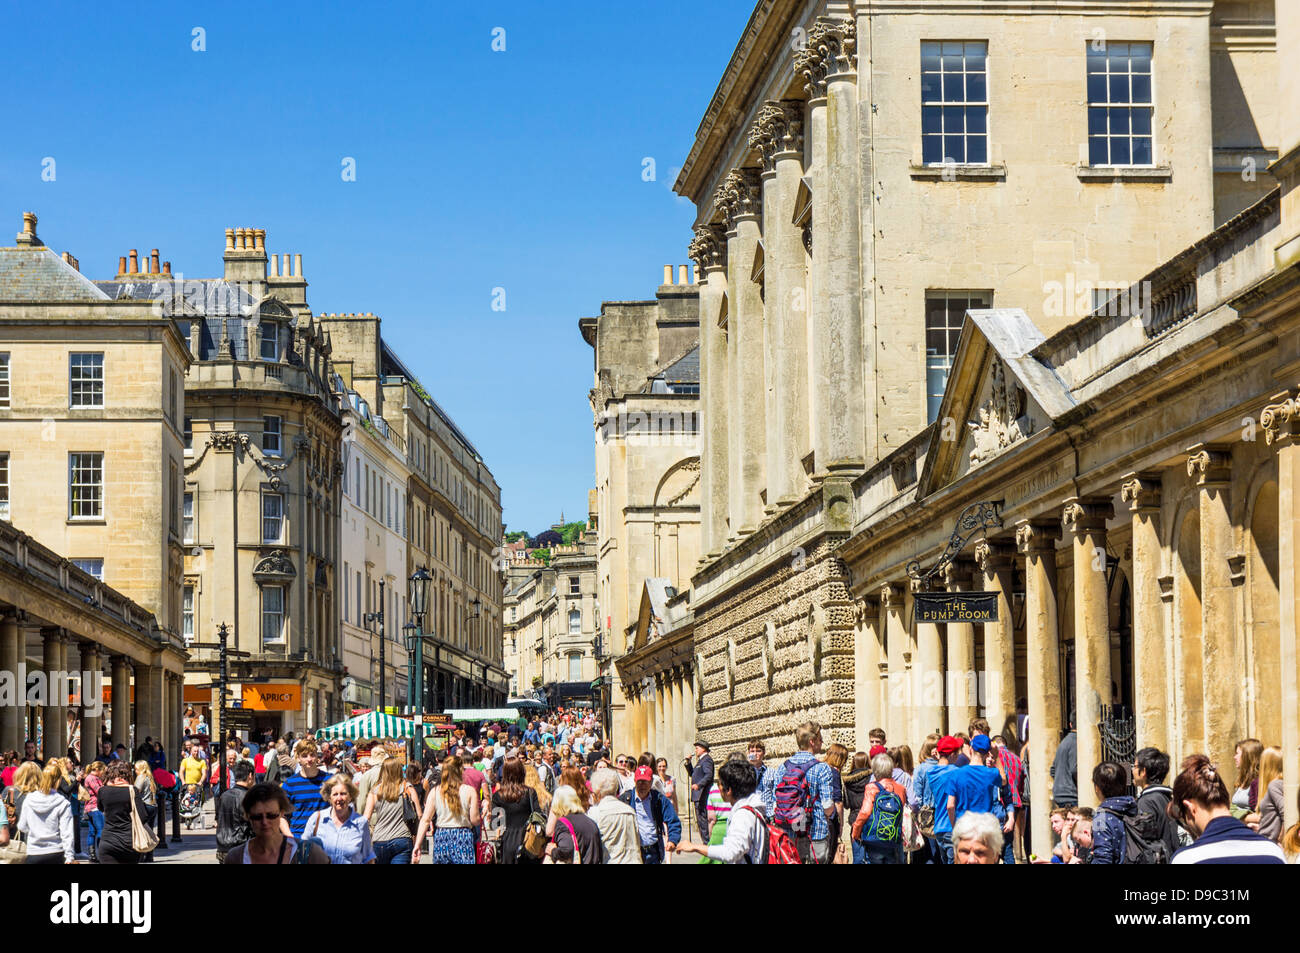 Busy street scene outside the Roman Baths in Bath city centre, Somerset, England, UK in summer Stock Photo